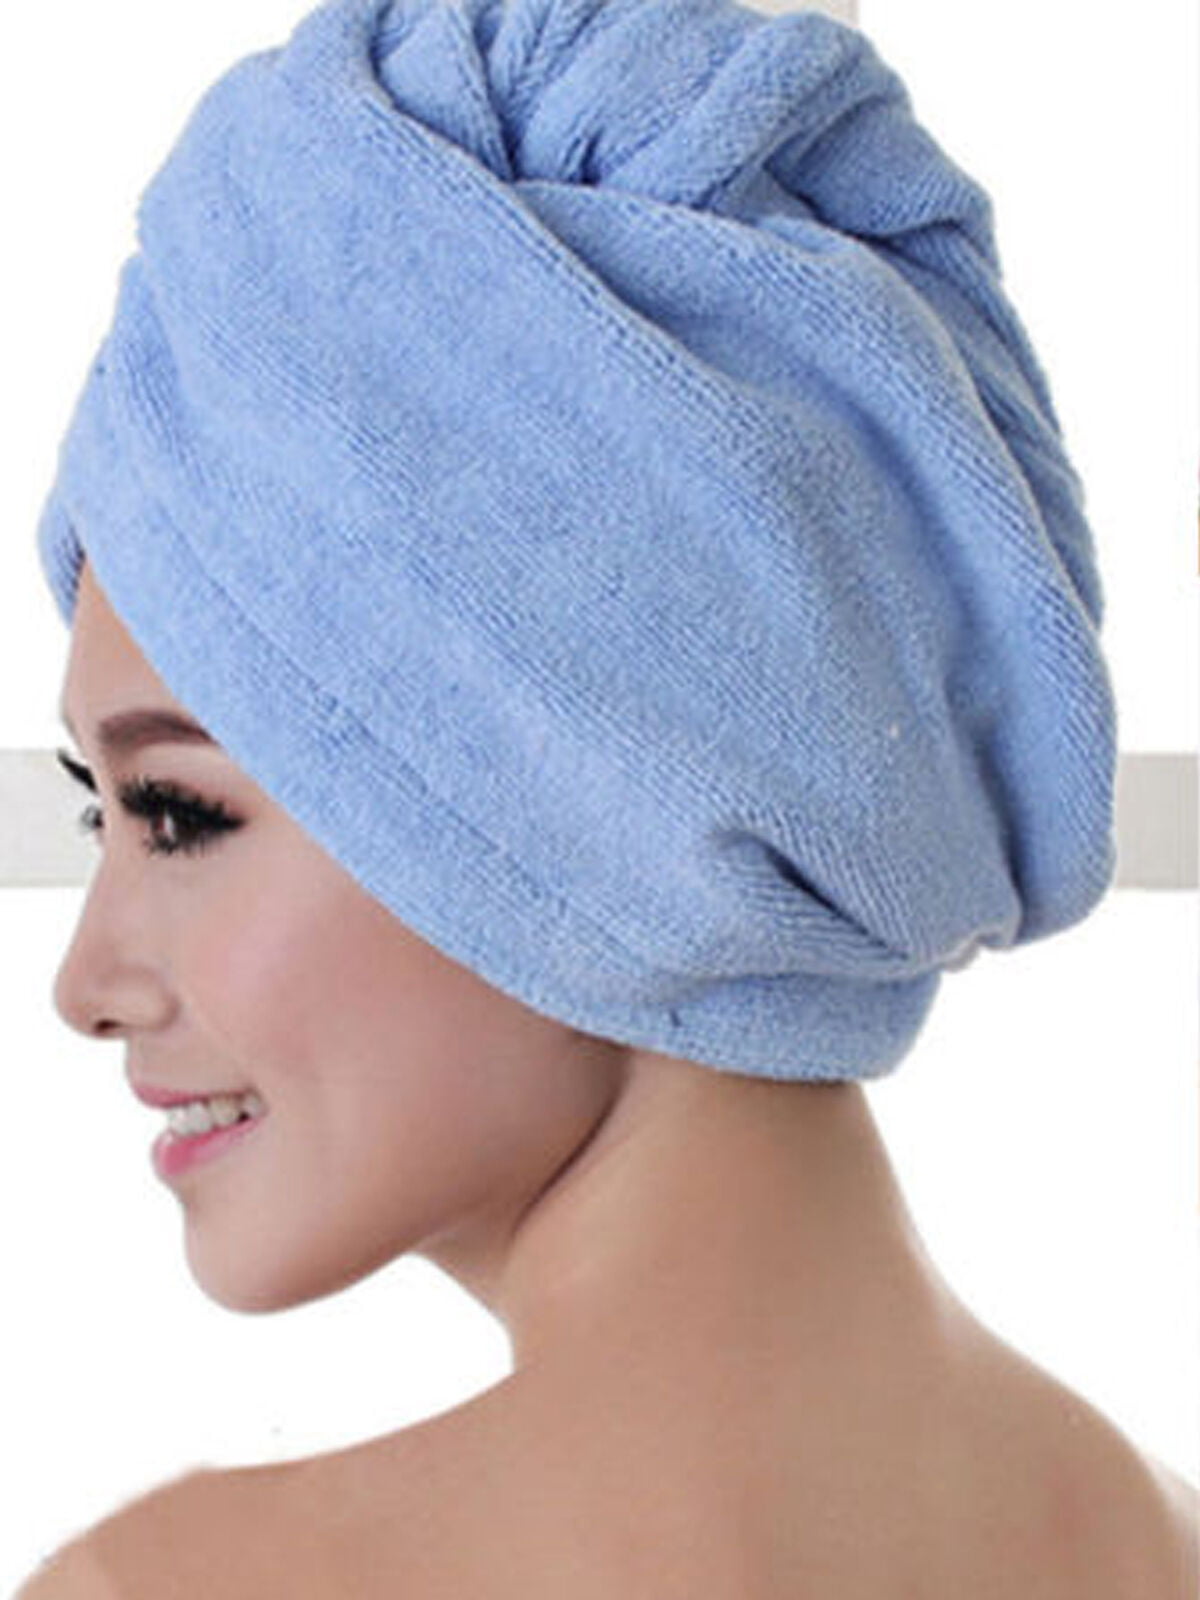 RAPID DRYING HAIR TOWEL CAP--Thick Absorbent Shower Cap 7 Colors 